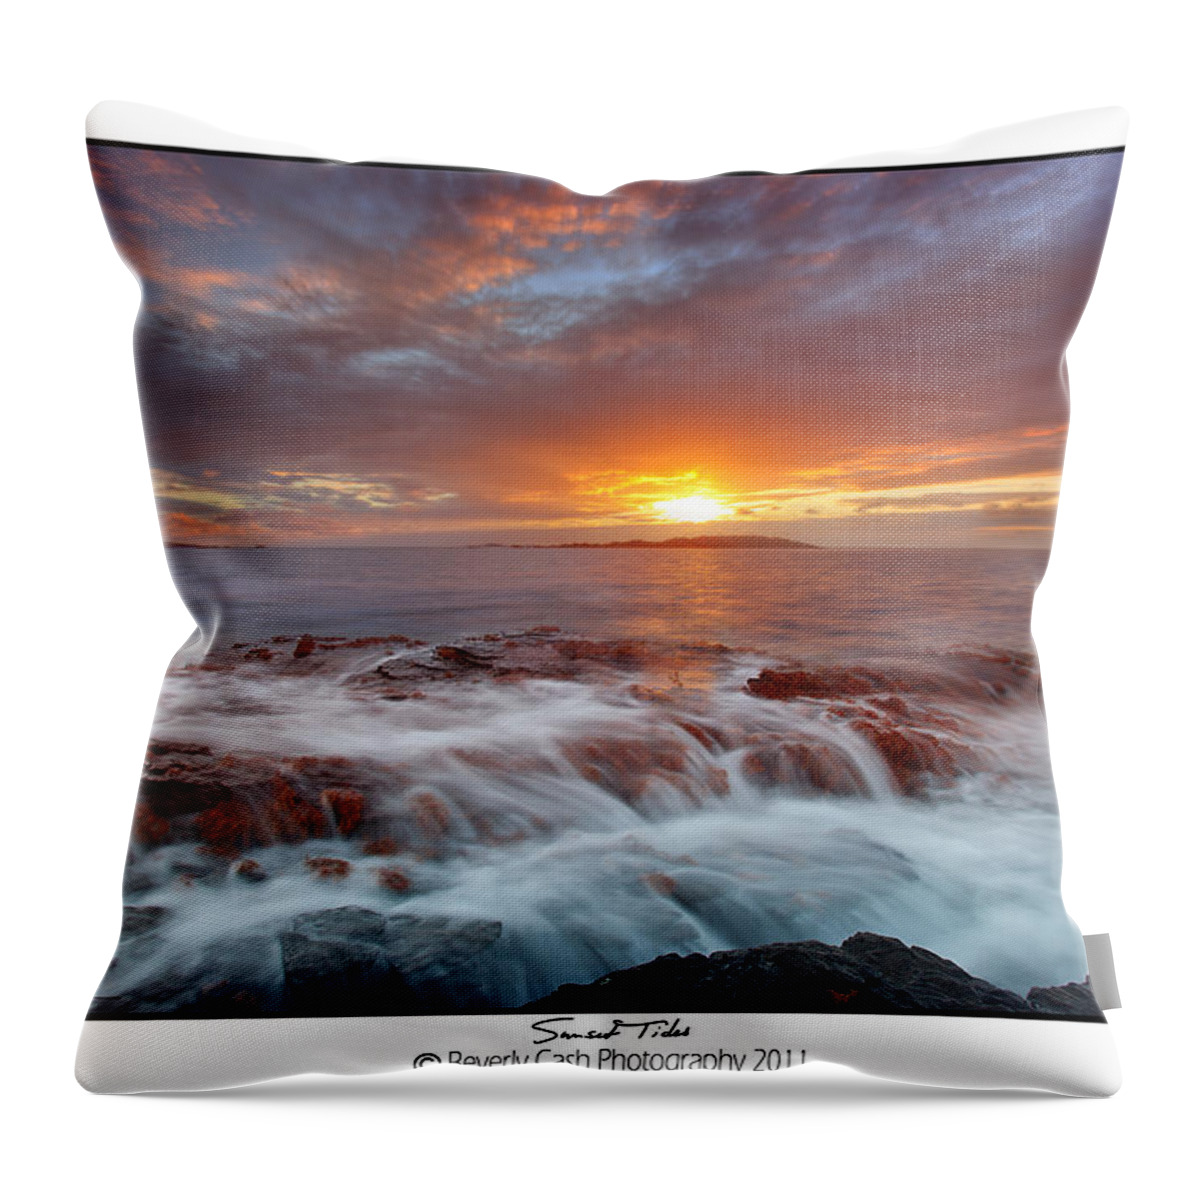  Seascape Throw Pillow featuring the photograph Sunset Tides - Cemlyn by B Cash